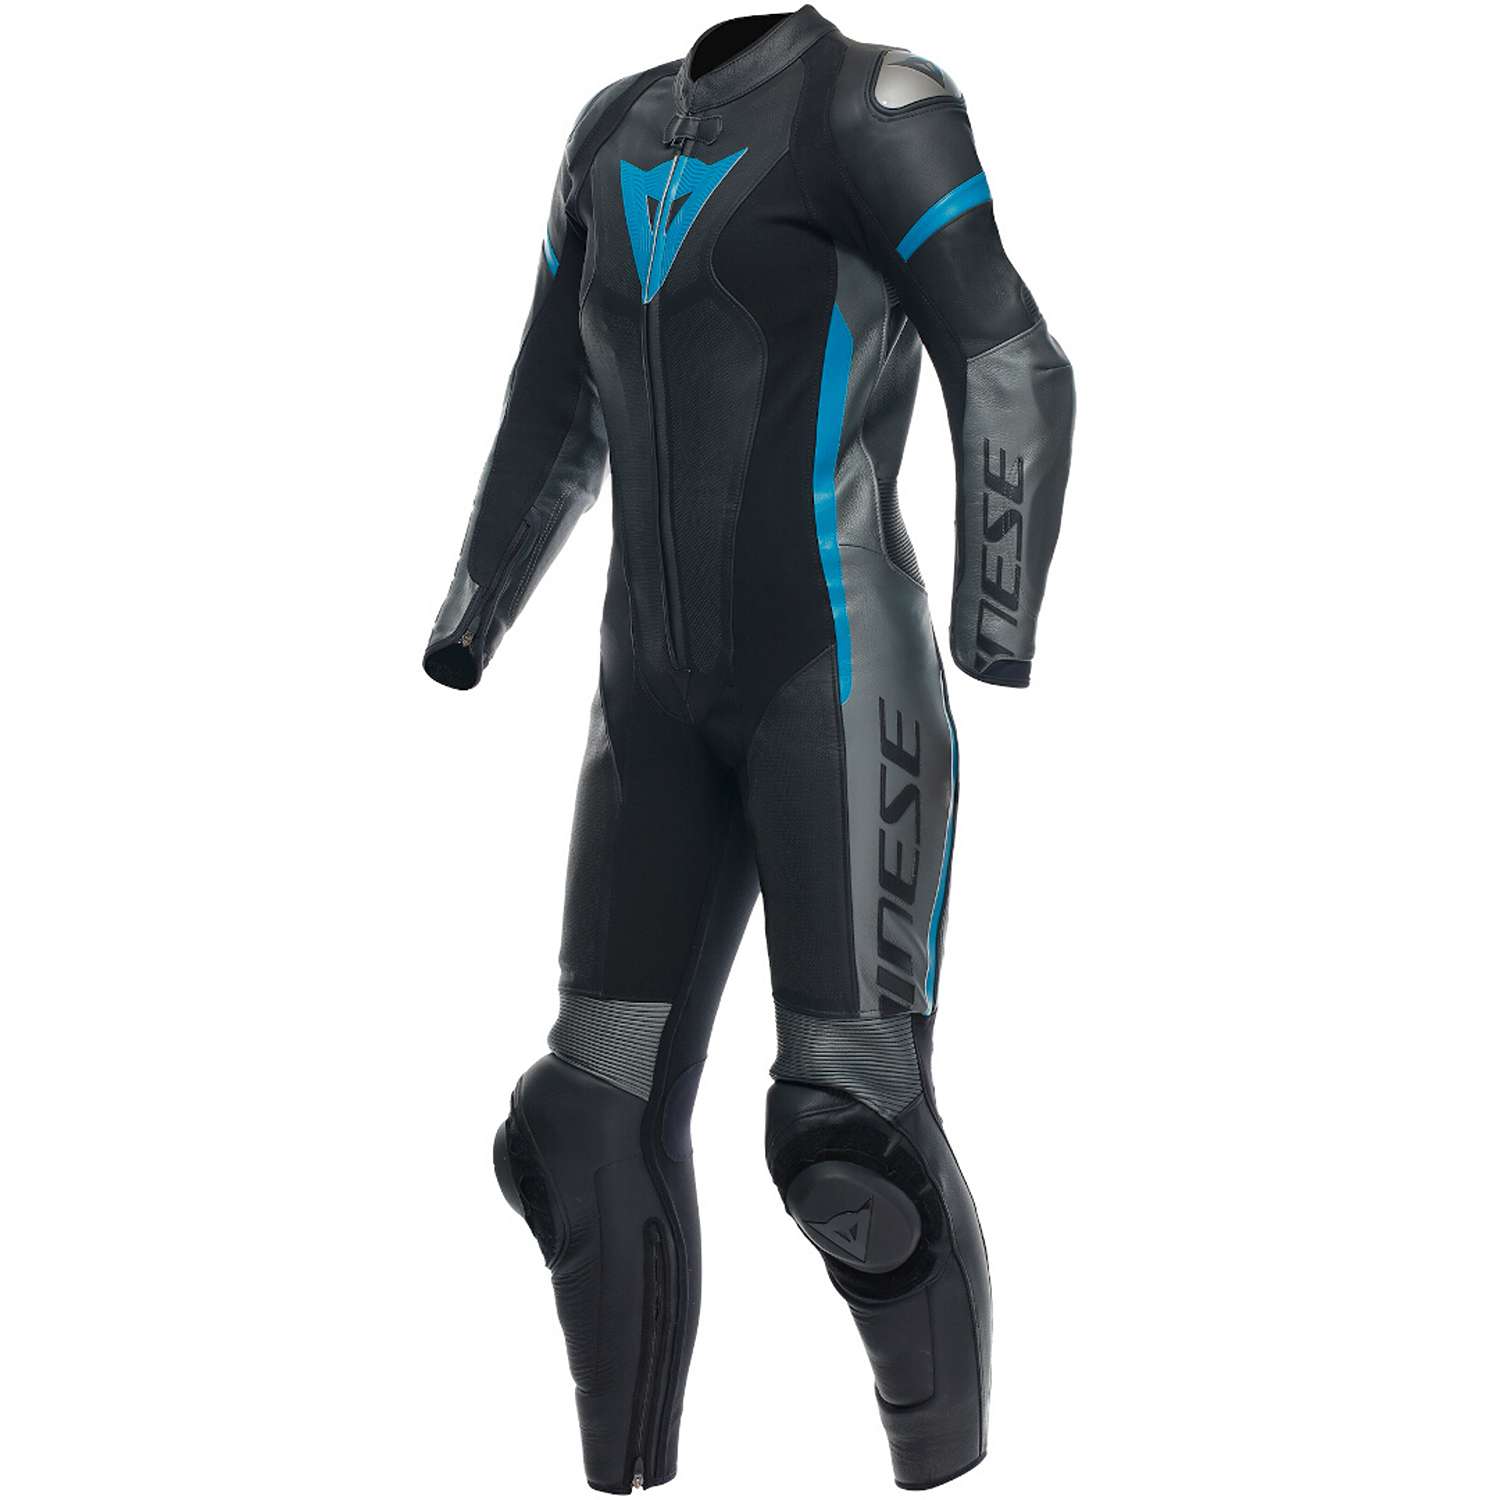 Image of EU Dainese Grobnik Lady Leather 1Pc Suit Perf Black Anthracite Teal Taille 38